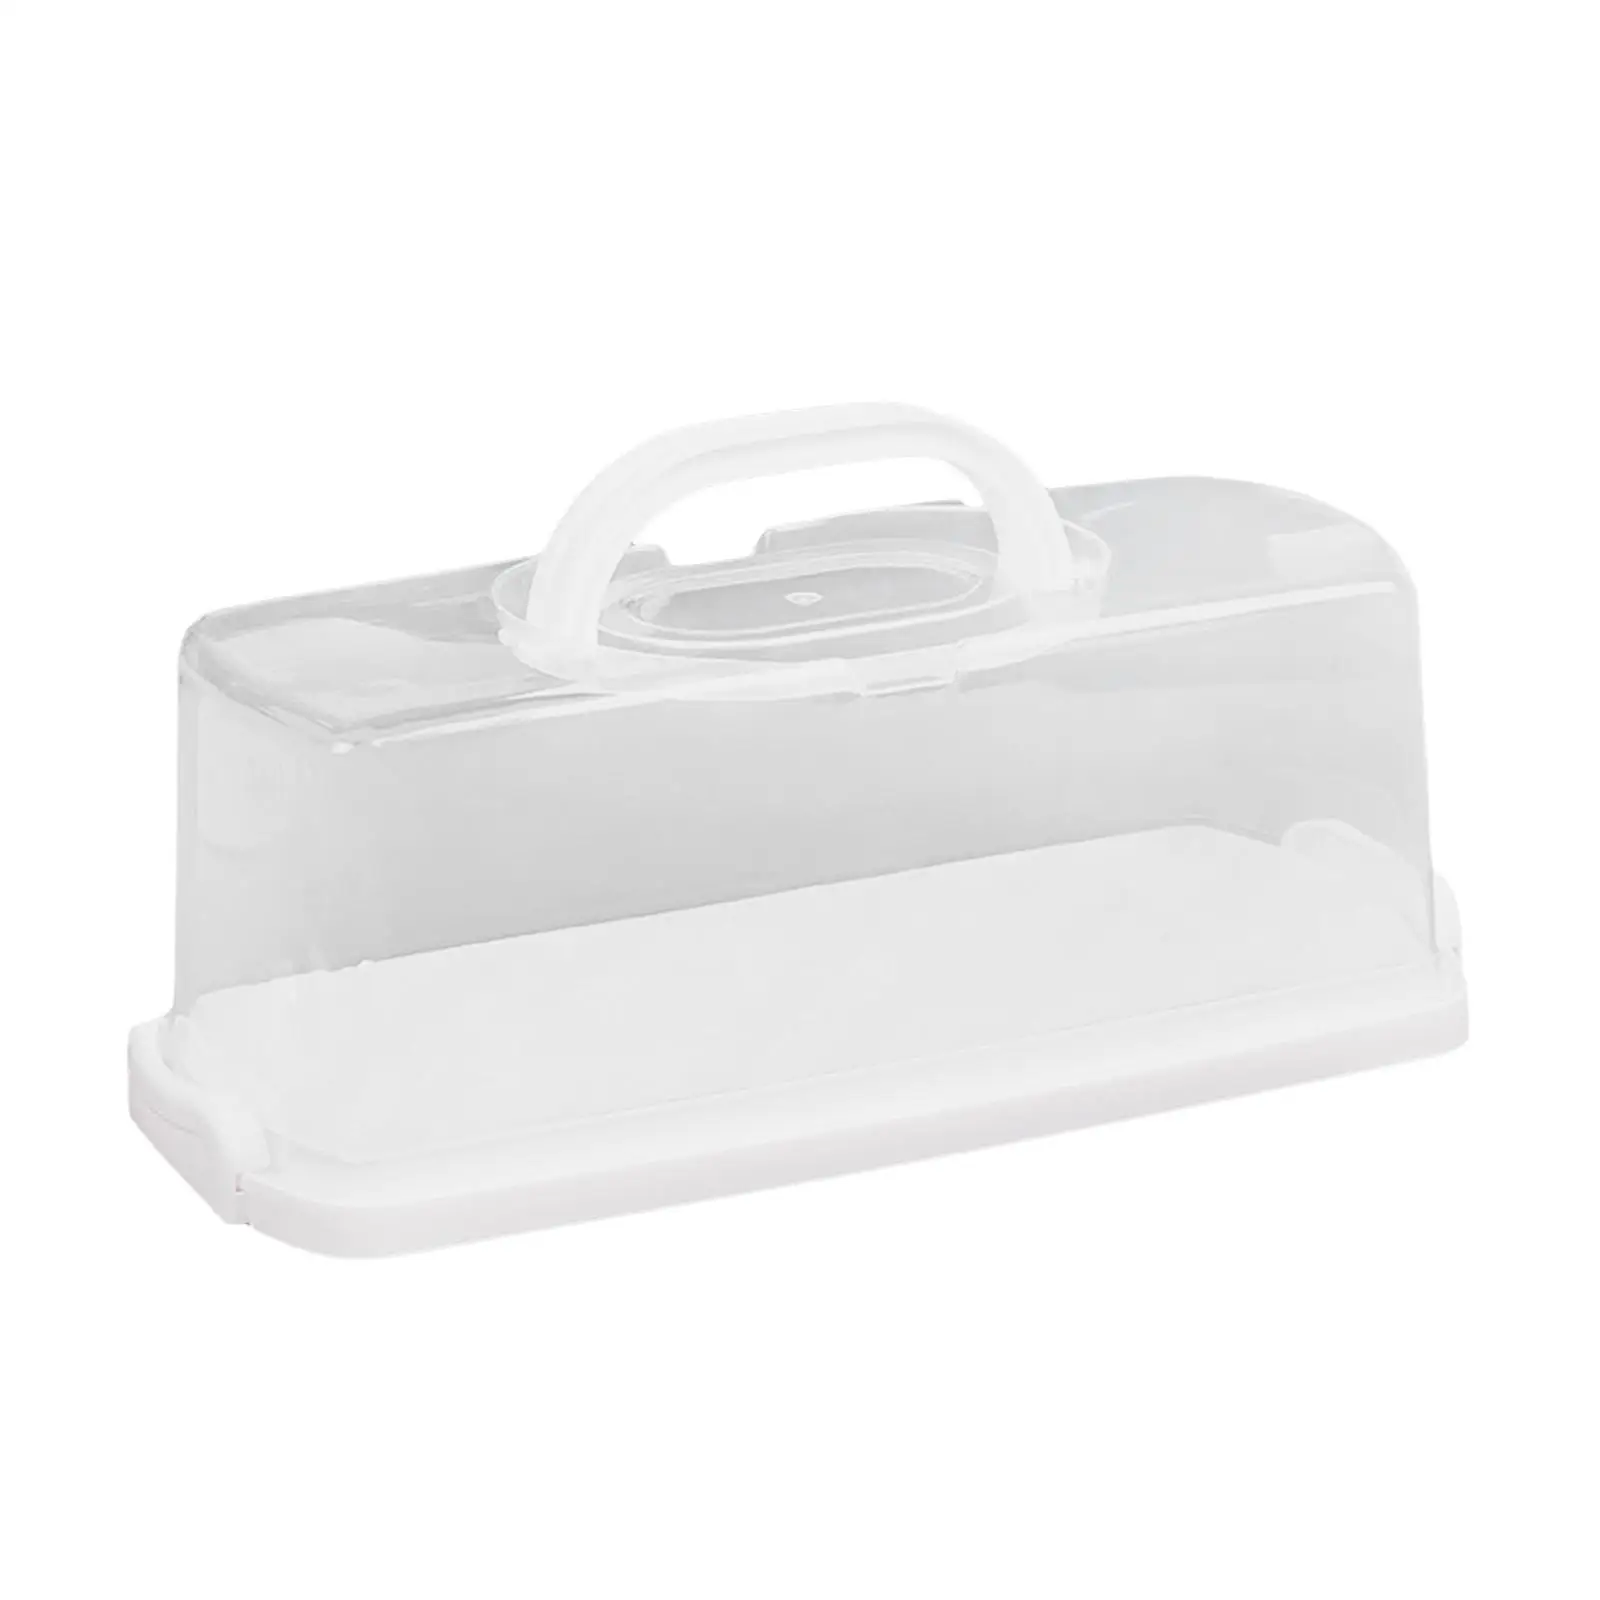 Loaf Bread Box Butter Dish Storage Box Portable with Lid Portable Bread Box with Handle Cake Storage Container for Birthday